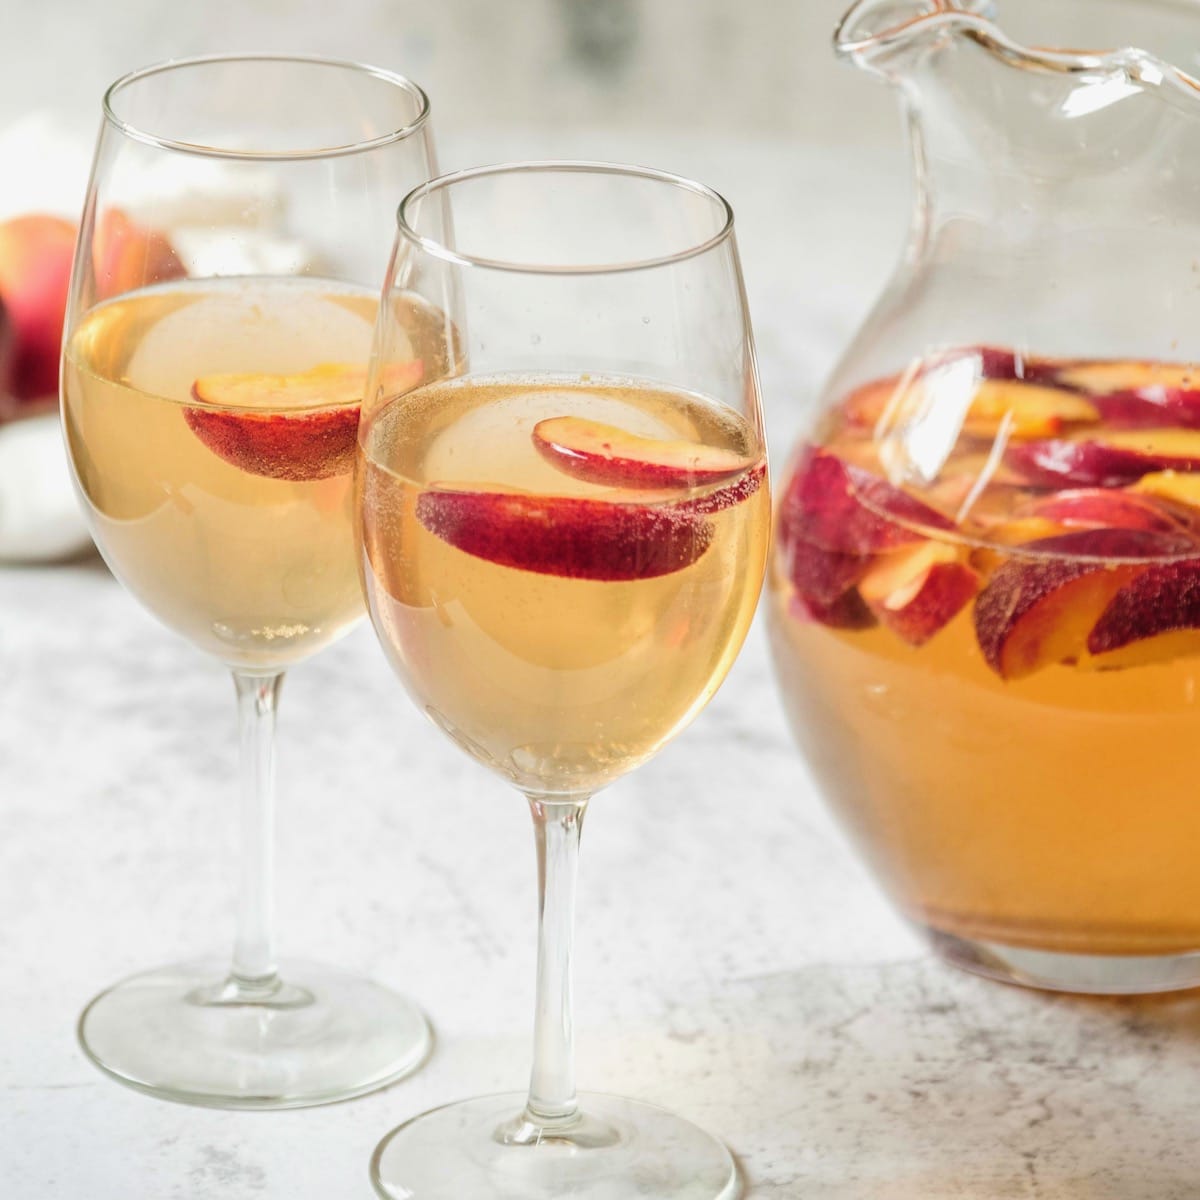 Close up shot of two wine glasses containing peach sangria and sliced peaches next to a glass pitcher of peach sangria and sliced peaches.